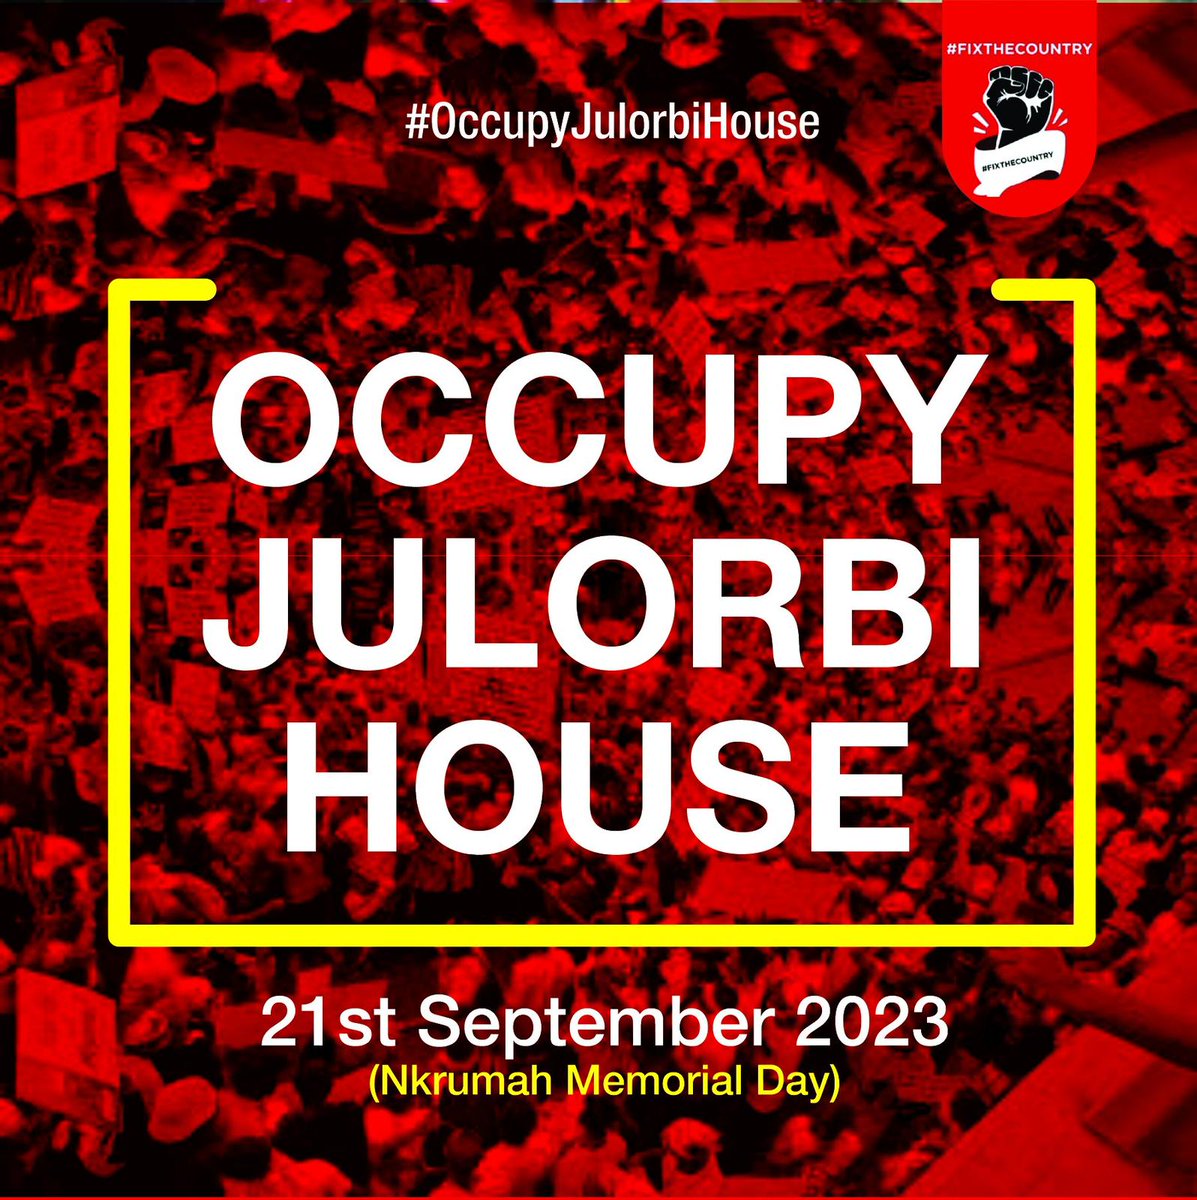 Our anger should be seen on the streets. No country has developed with citizens who complain in their rooms. Be part of the discussion to build this Nation. #FixTheCountry #OccupyJulorBiHouse #21September